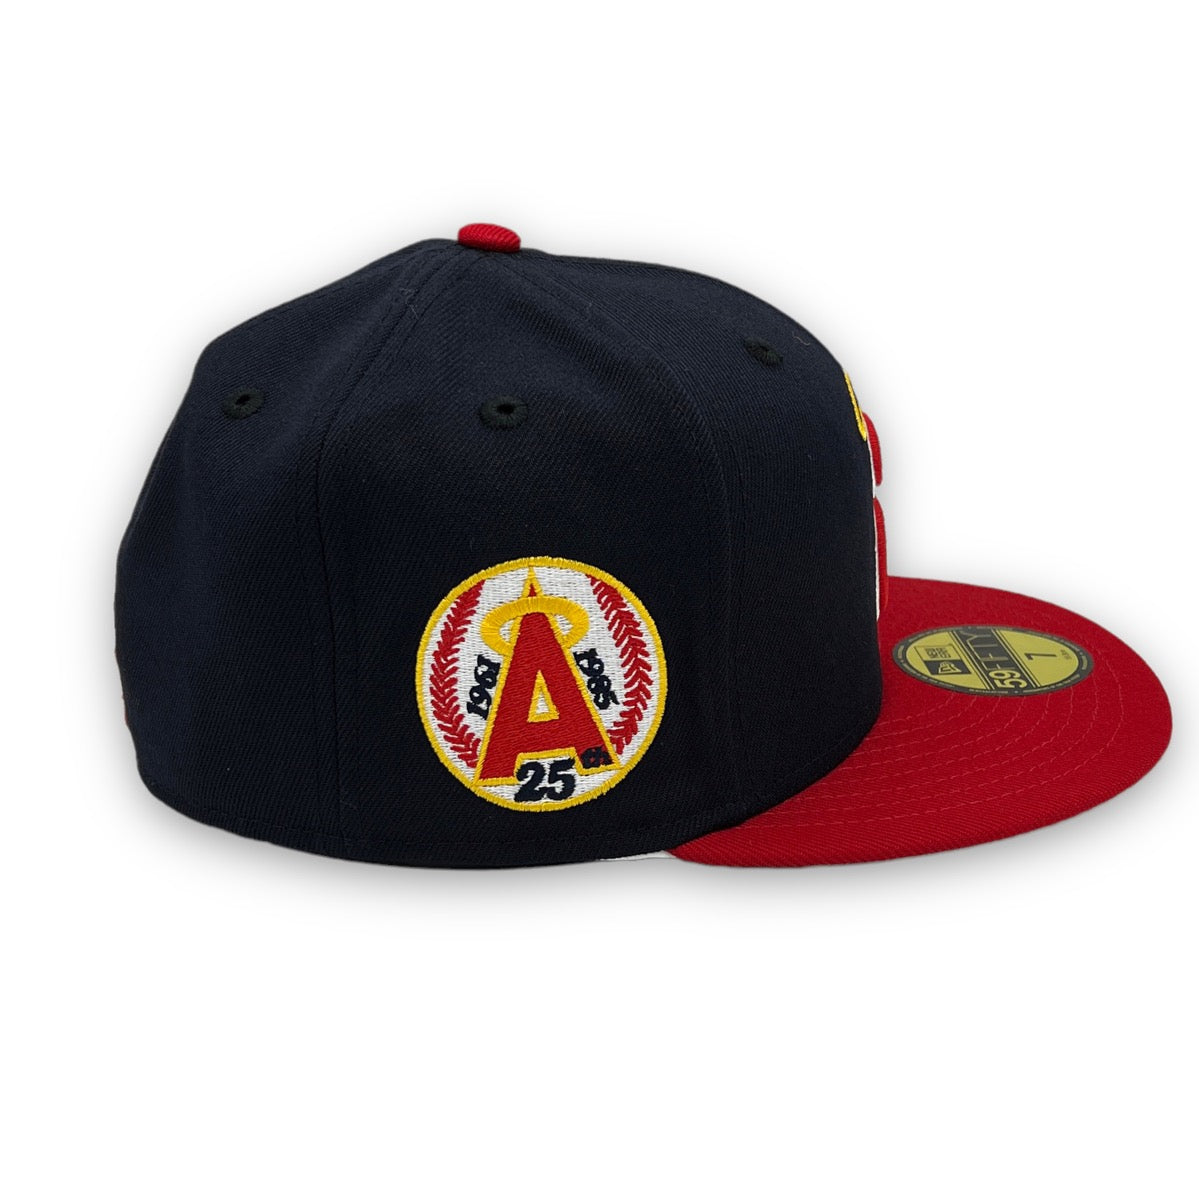 New Era, Accessories, Anaheim Angels 5th Anniversary Fitted Hat Navy Blue  Light Blue Gray Size 7 2